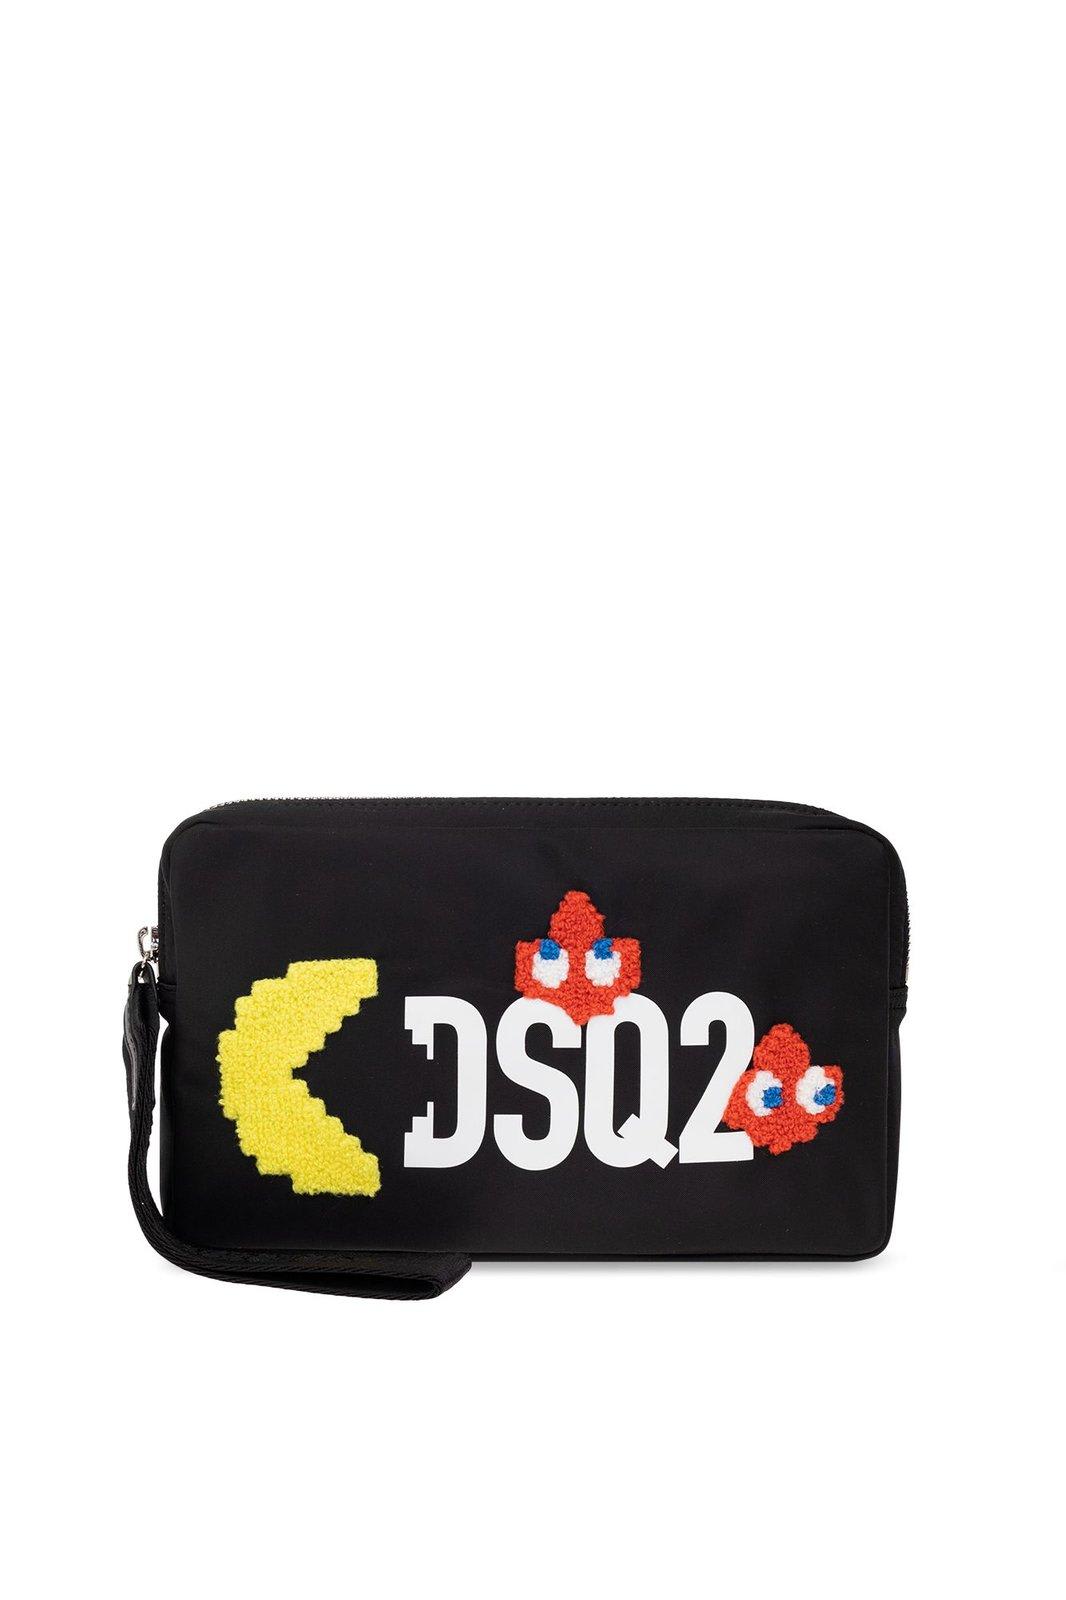 DSQUARED2 PAC-MAN LOGO PRINTED BEAUTY CASE